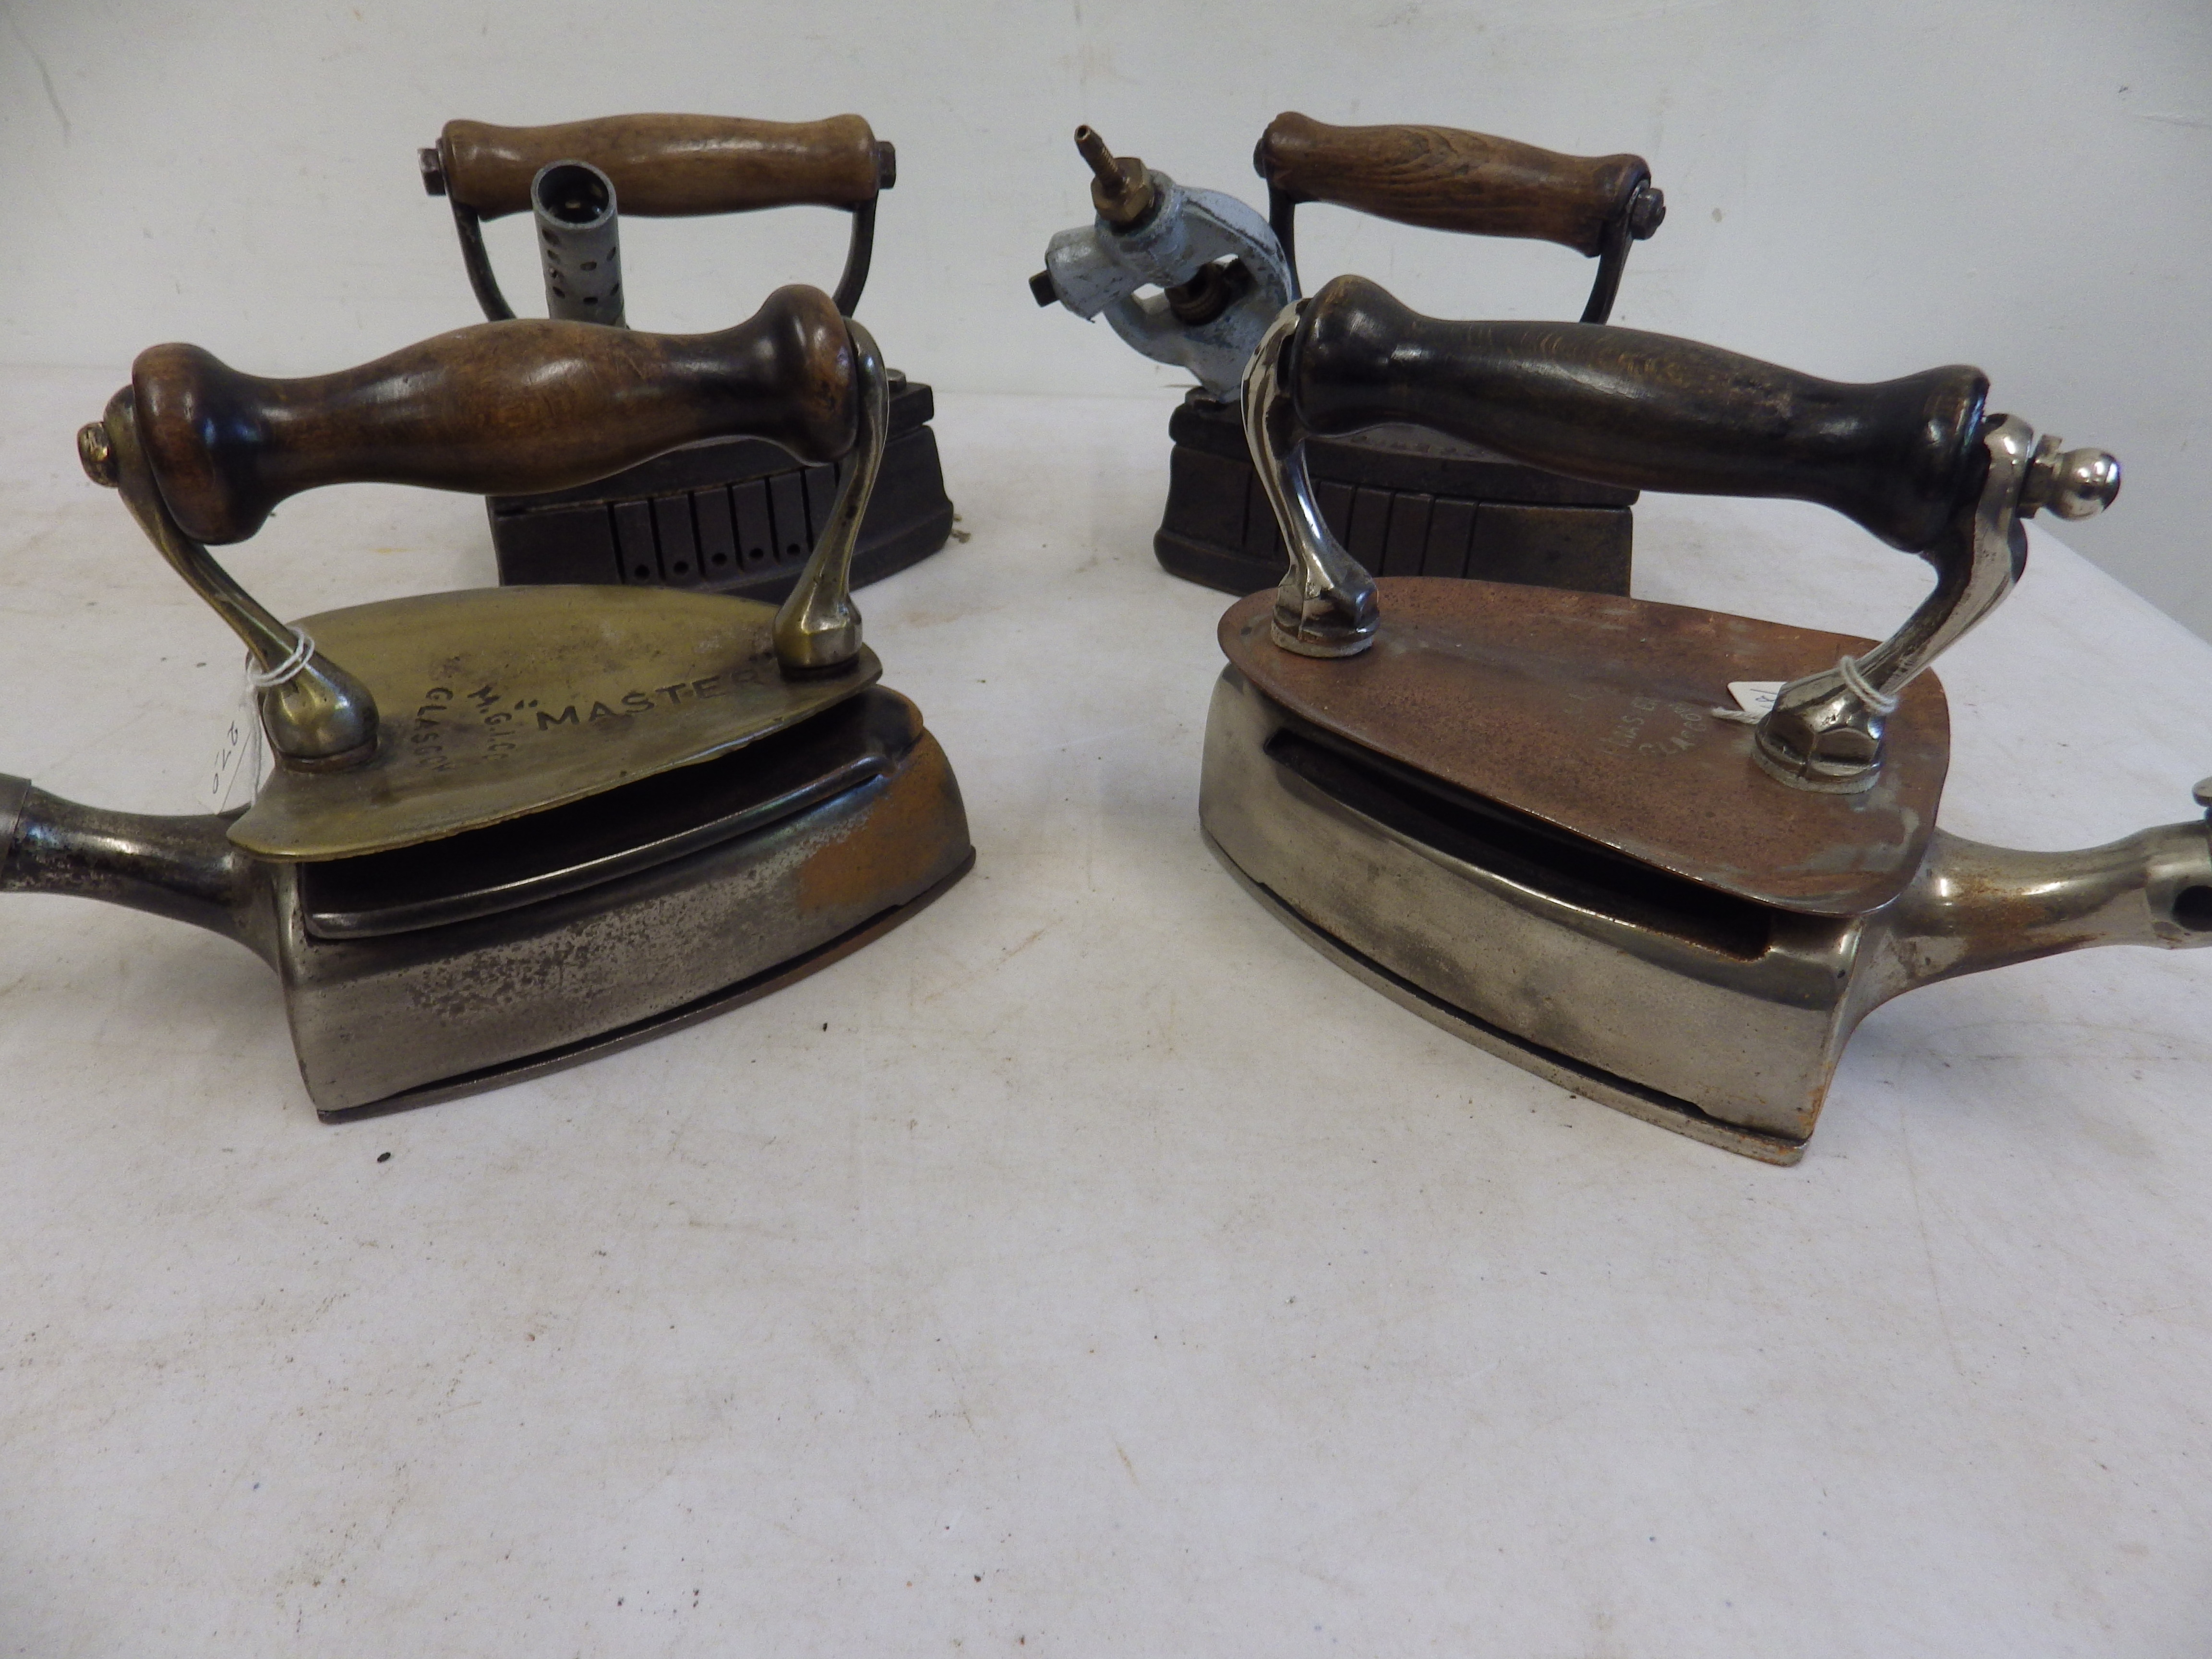 2 M G I Co Glasgow Master gas irons with copper/brass heat shields together with 2 Lister Bros No. - Image 2 of 6